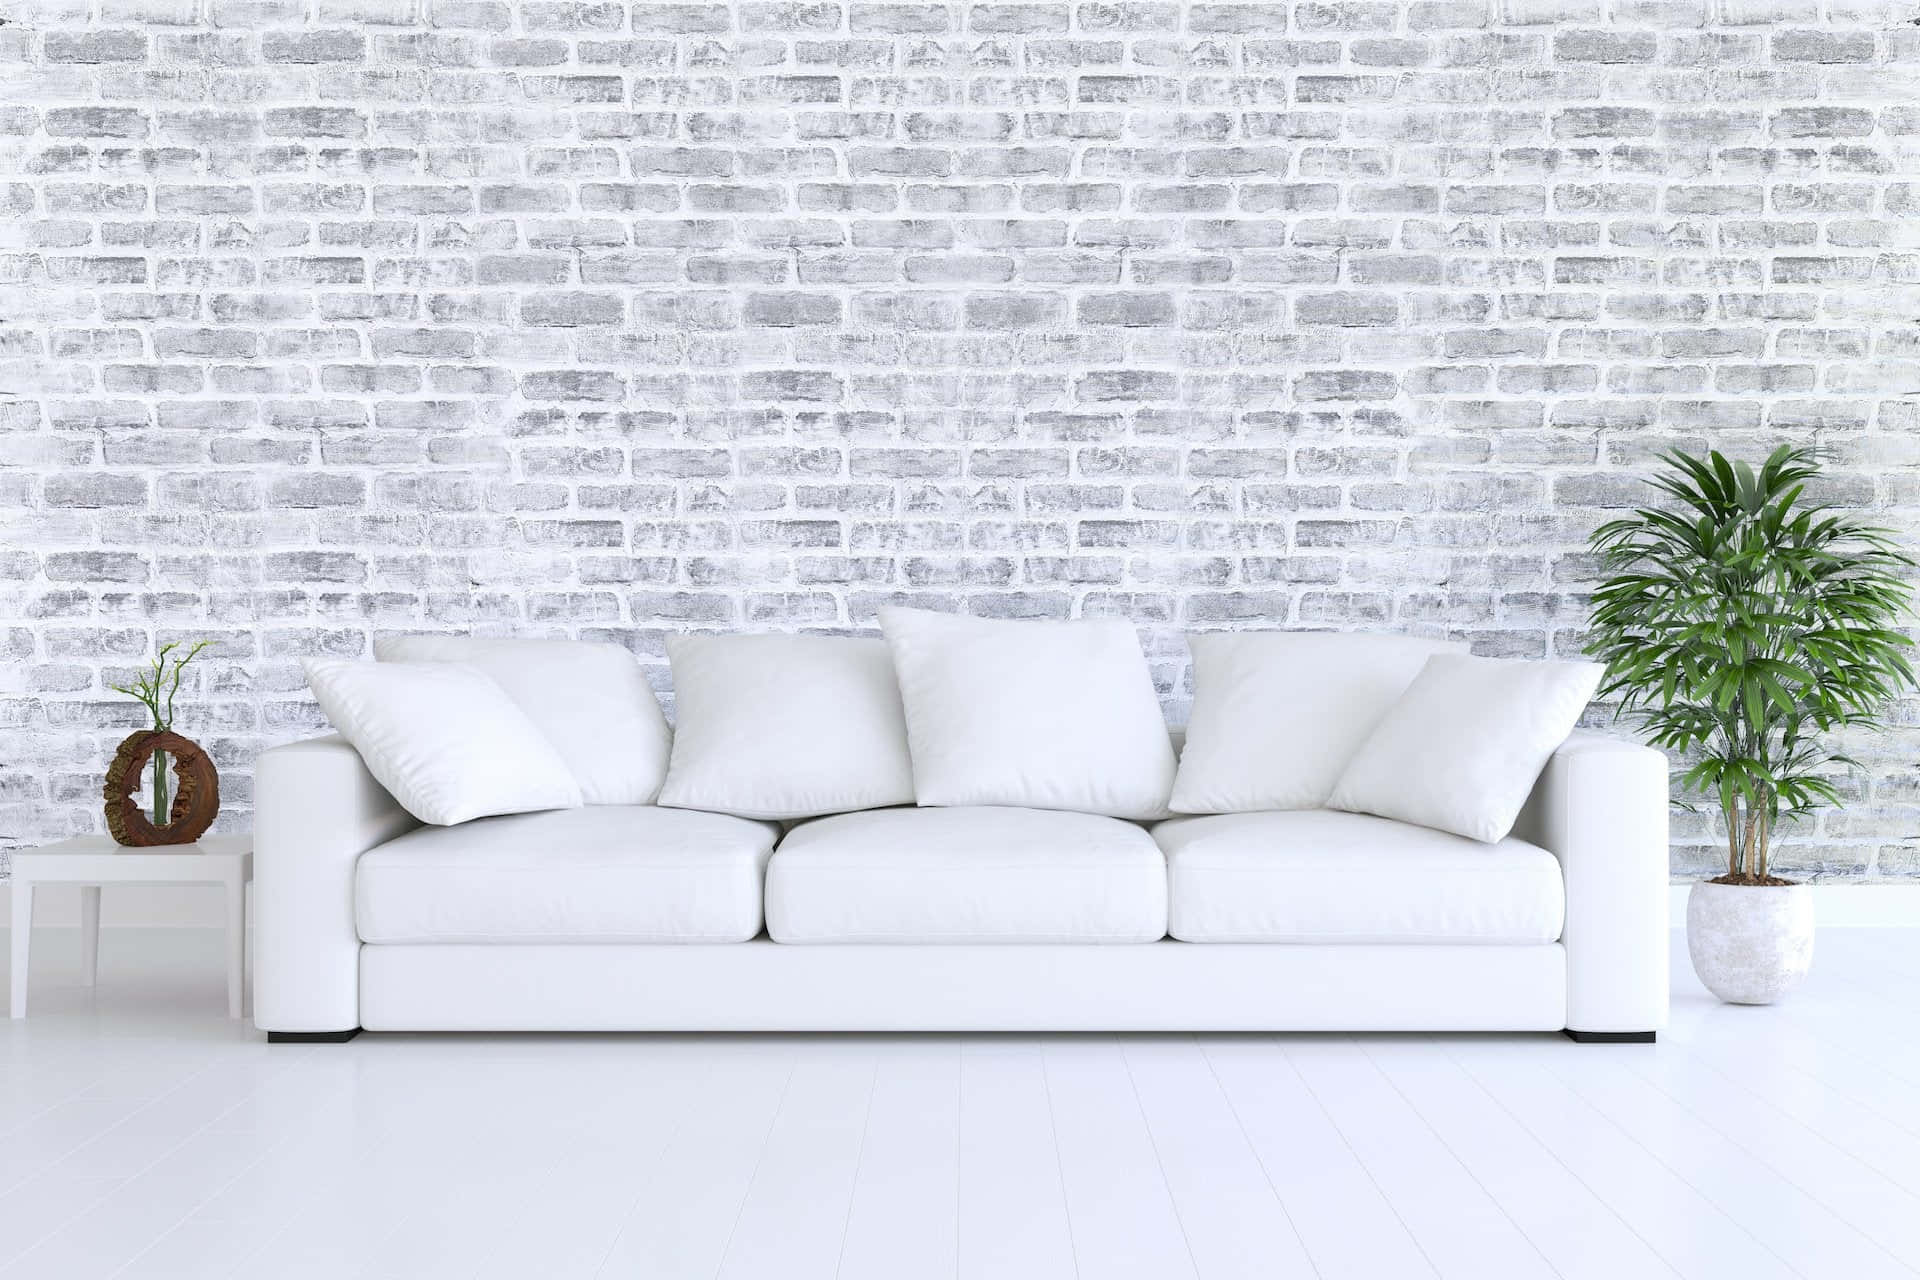 White Couch In Front Of A Brick Wall